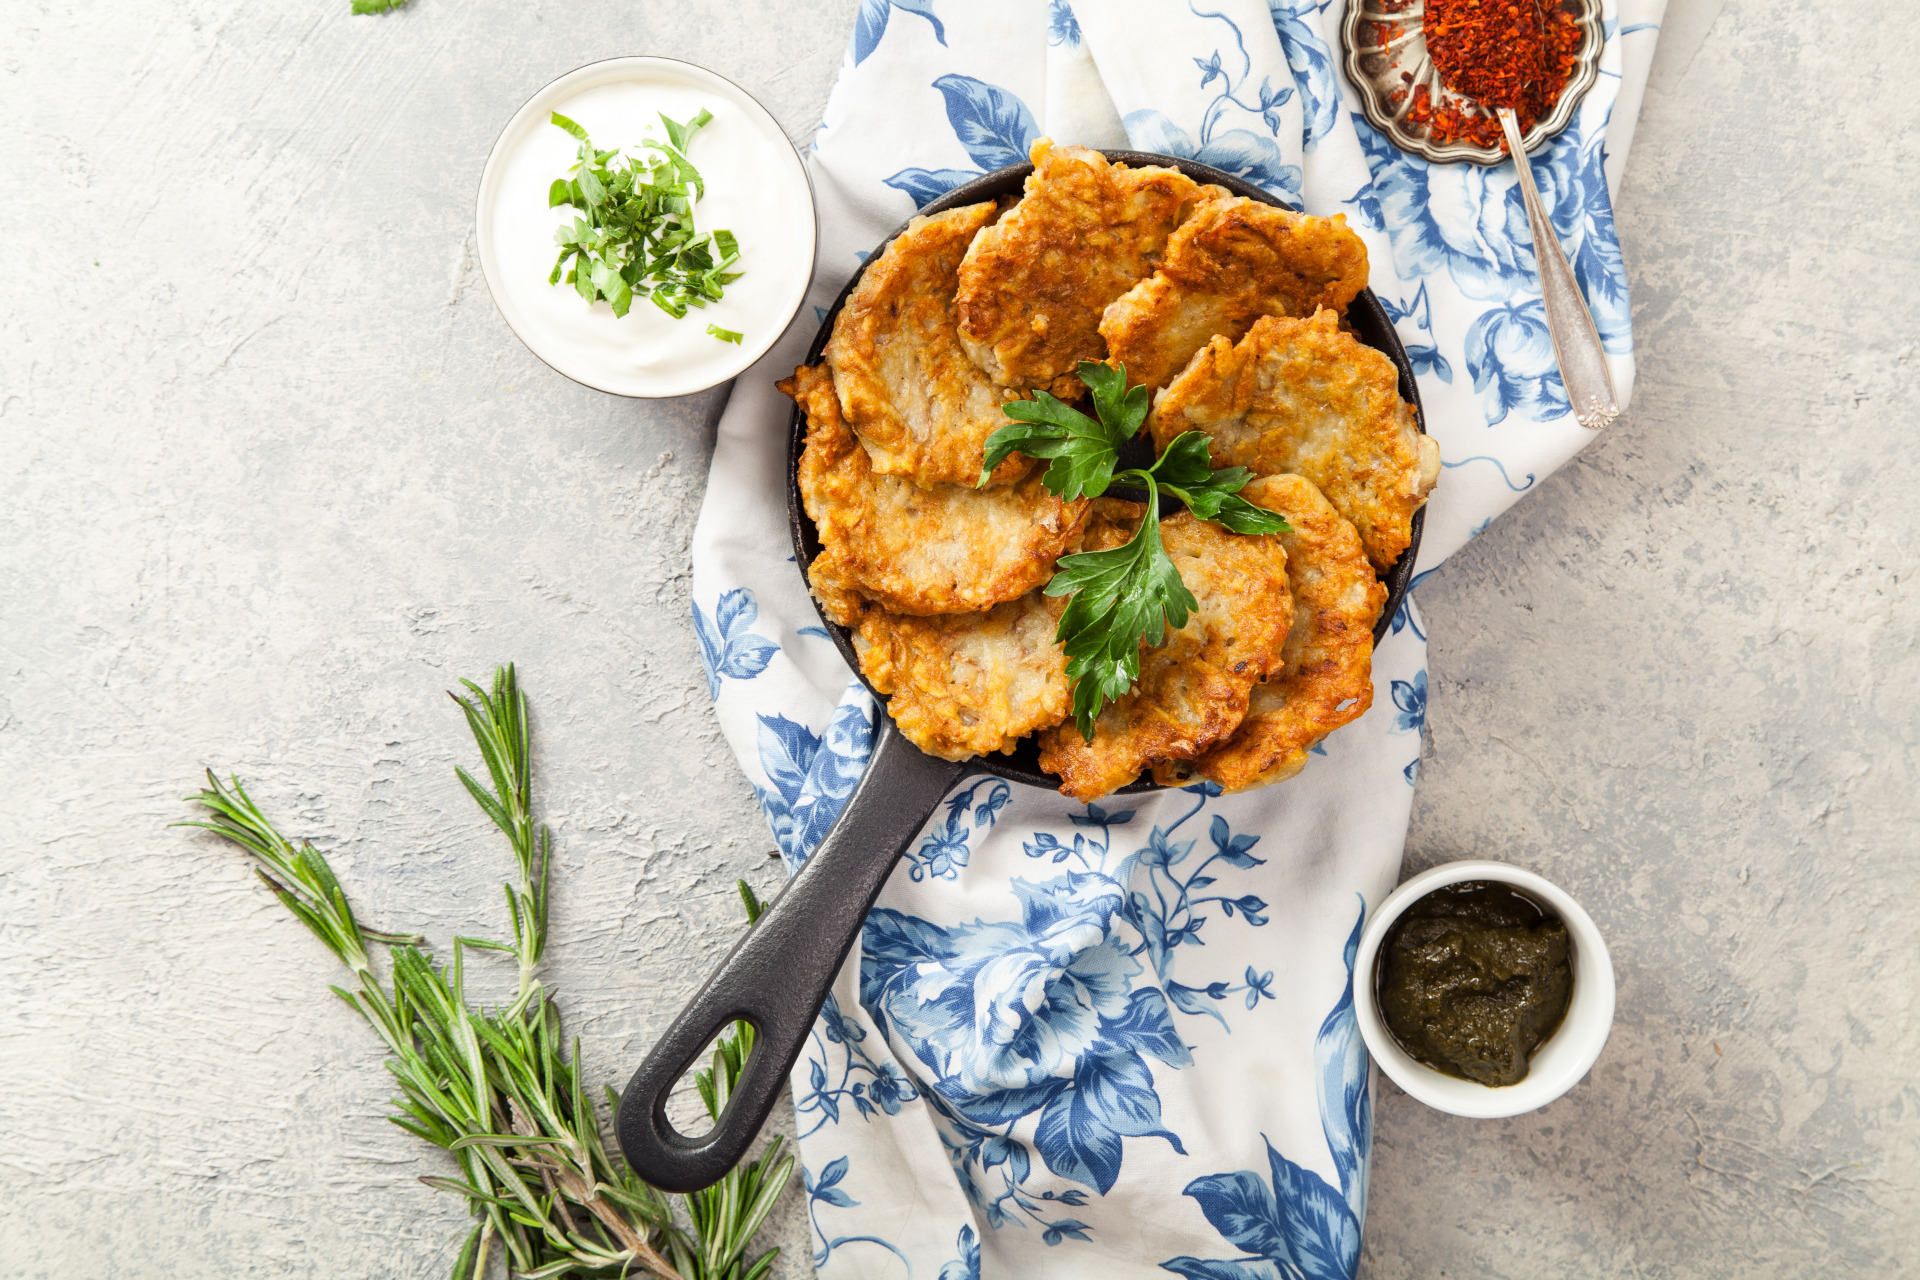 Potato latkes traditional jewish pancakes with sour cream, parsley, dry red pepper flakes and mint sauce. Background, white napkin with blue flowers